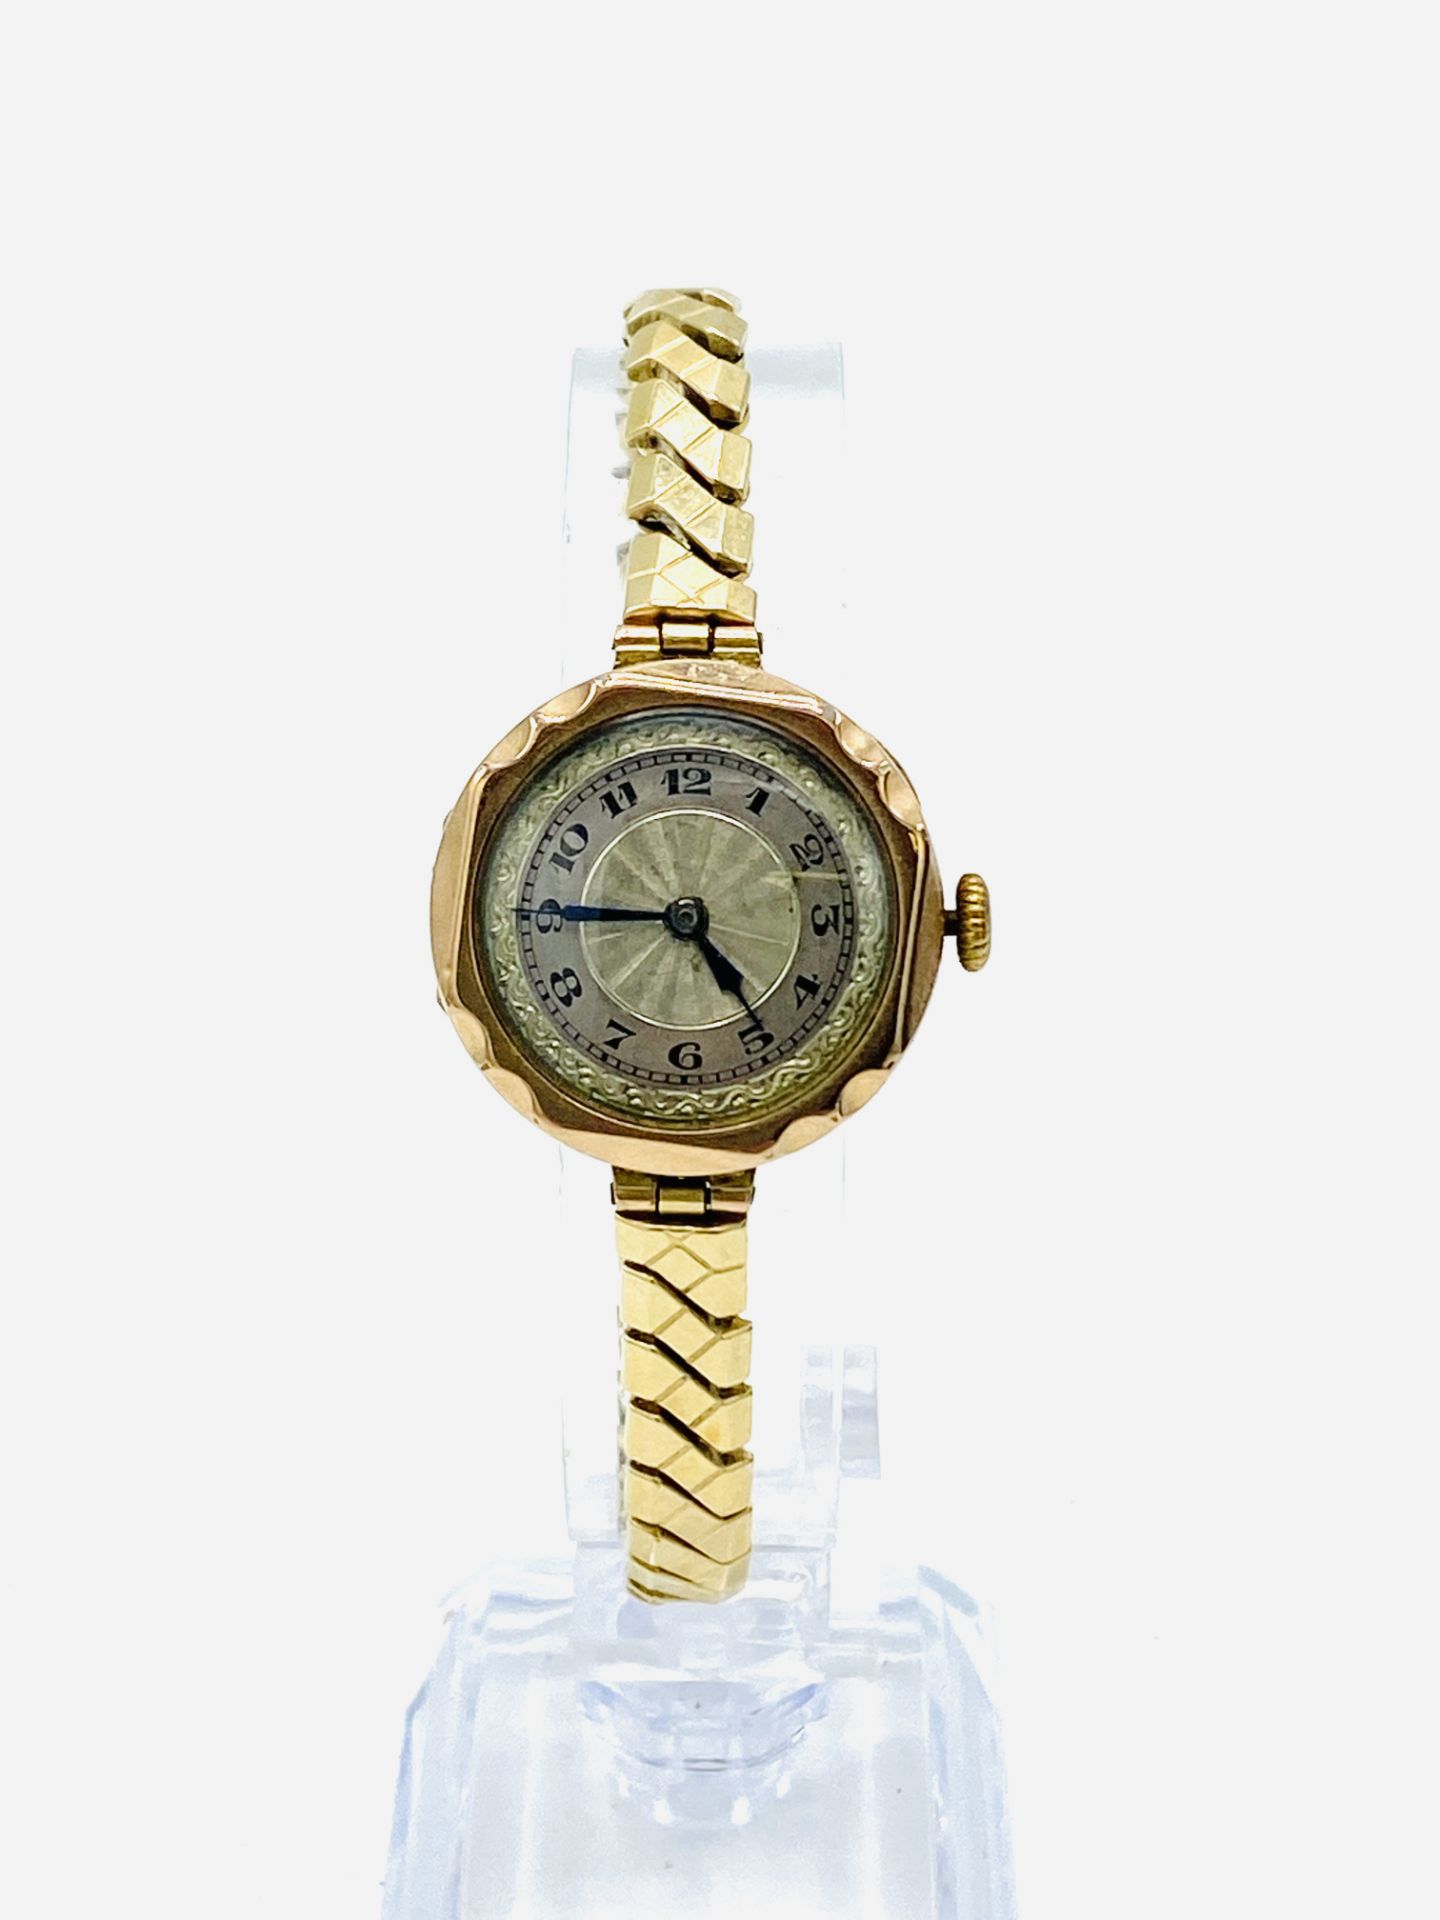 Ladies wrist watch with 9ct gold case